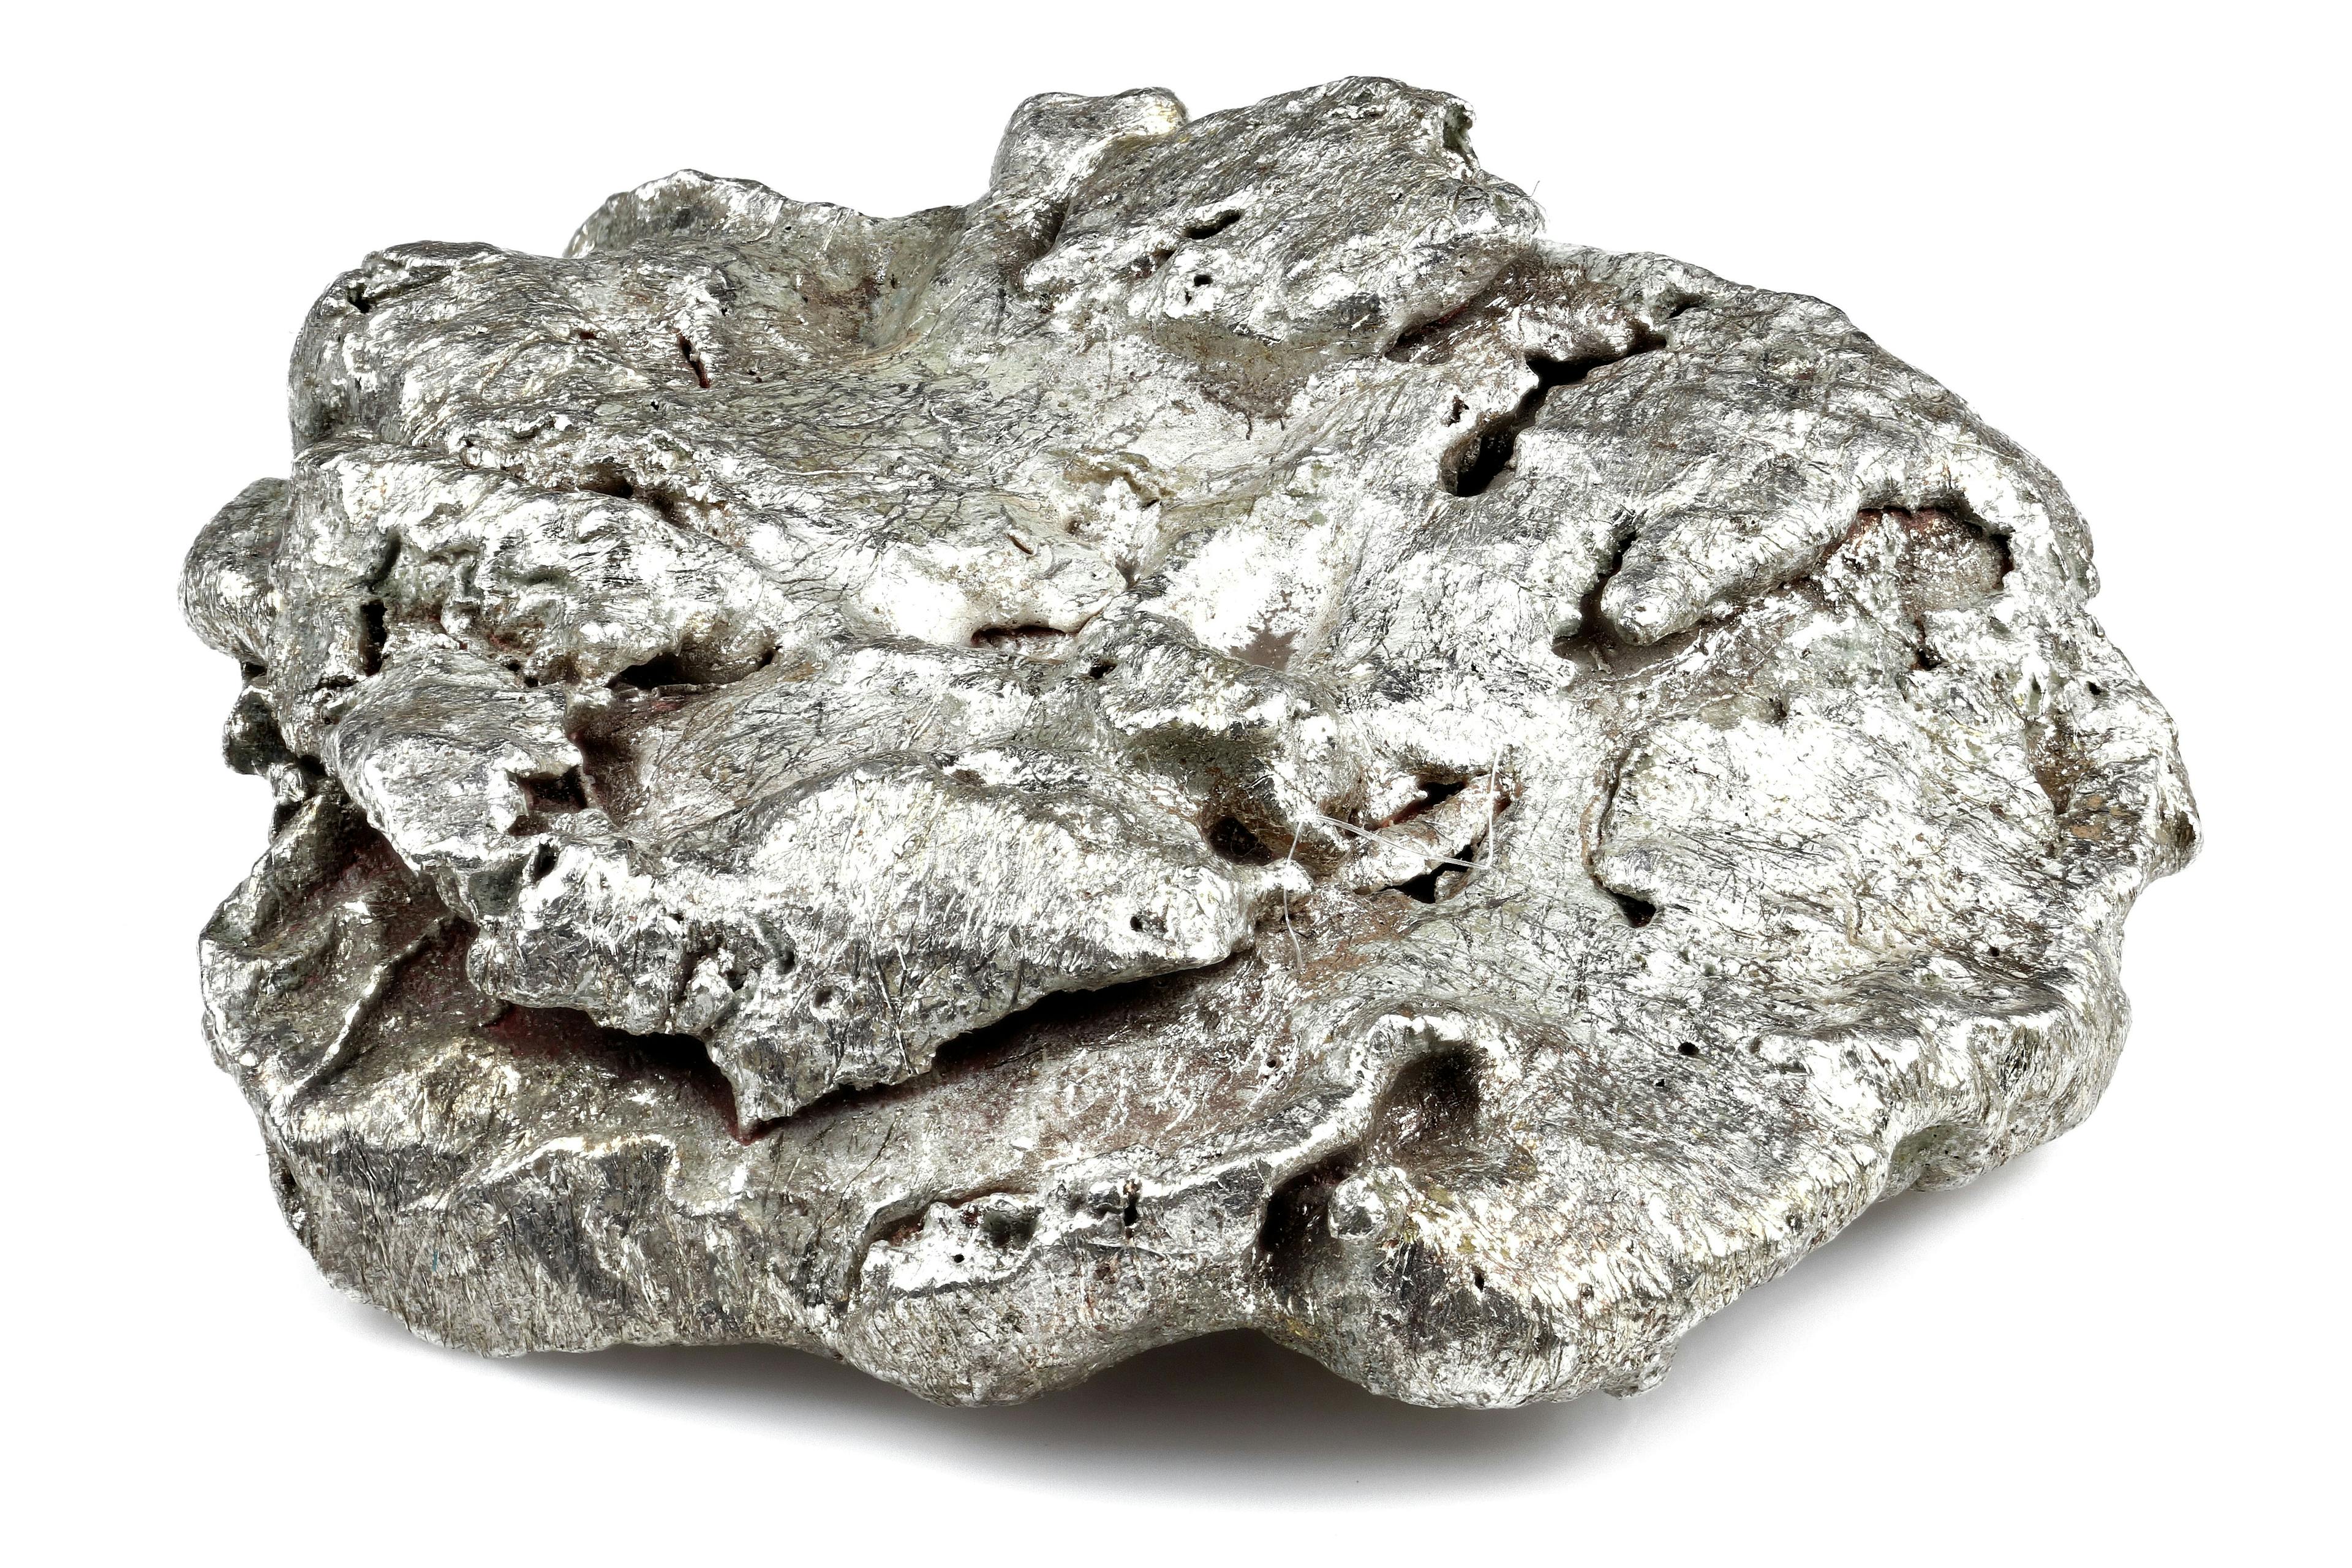 native silver nugget from Liberia isolated on white background | Image Credit: ©  Björn Wylezich - stock.adobe.com